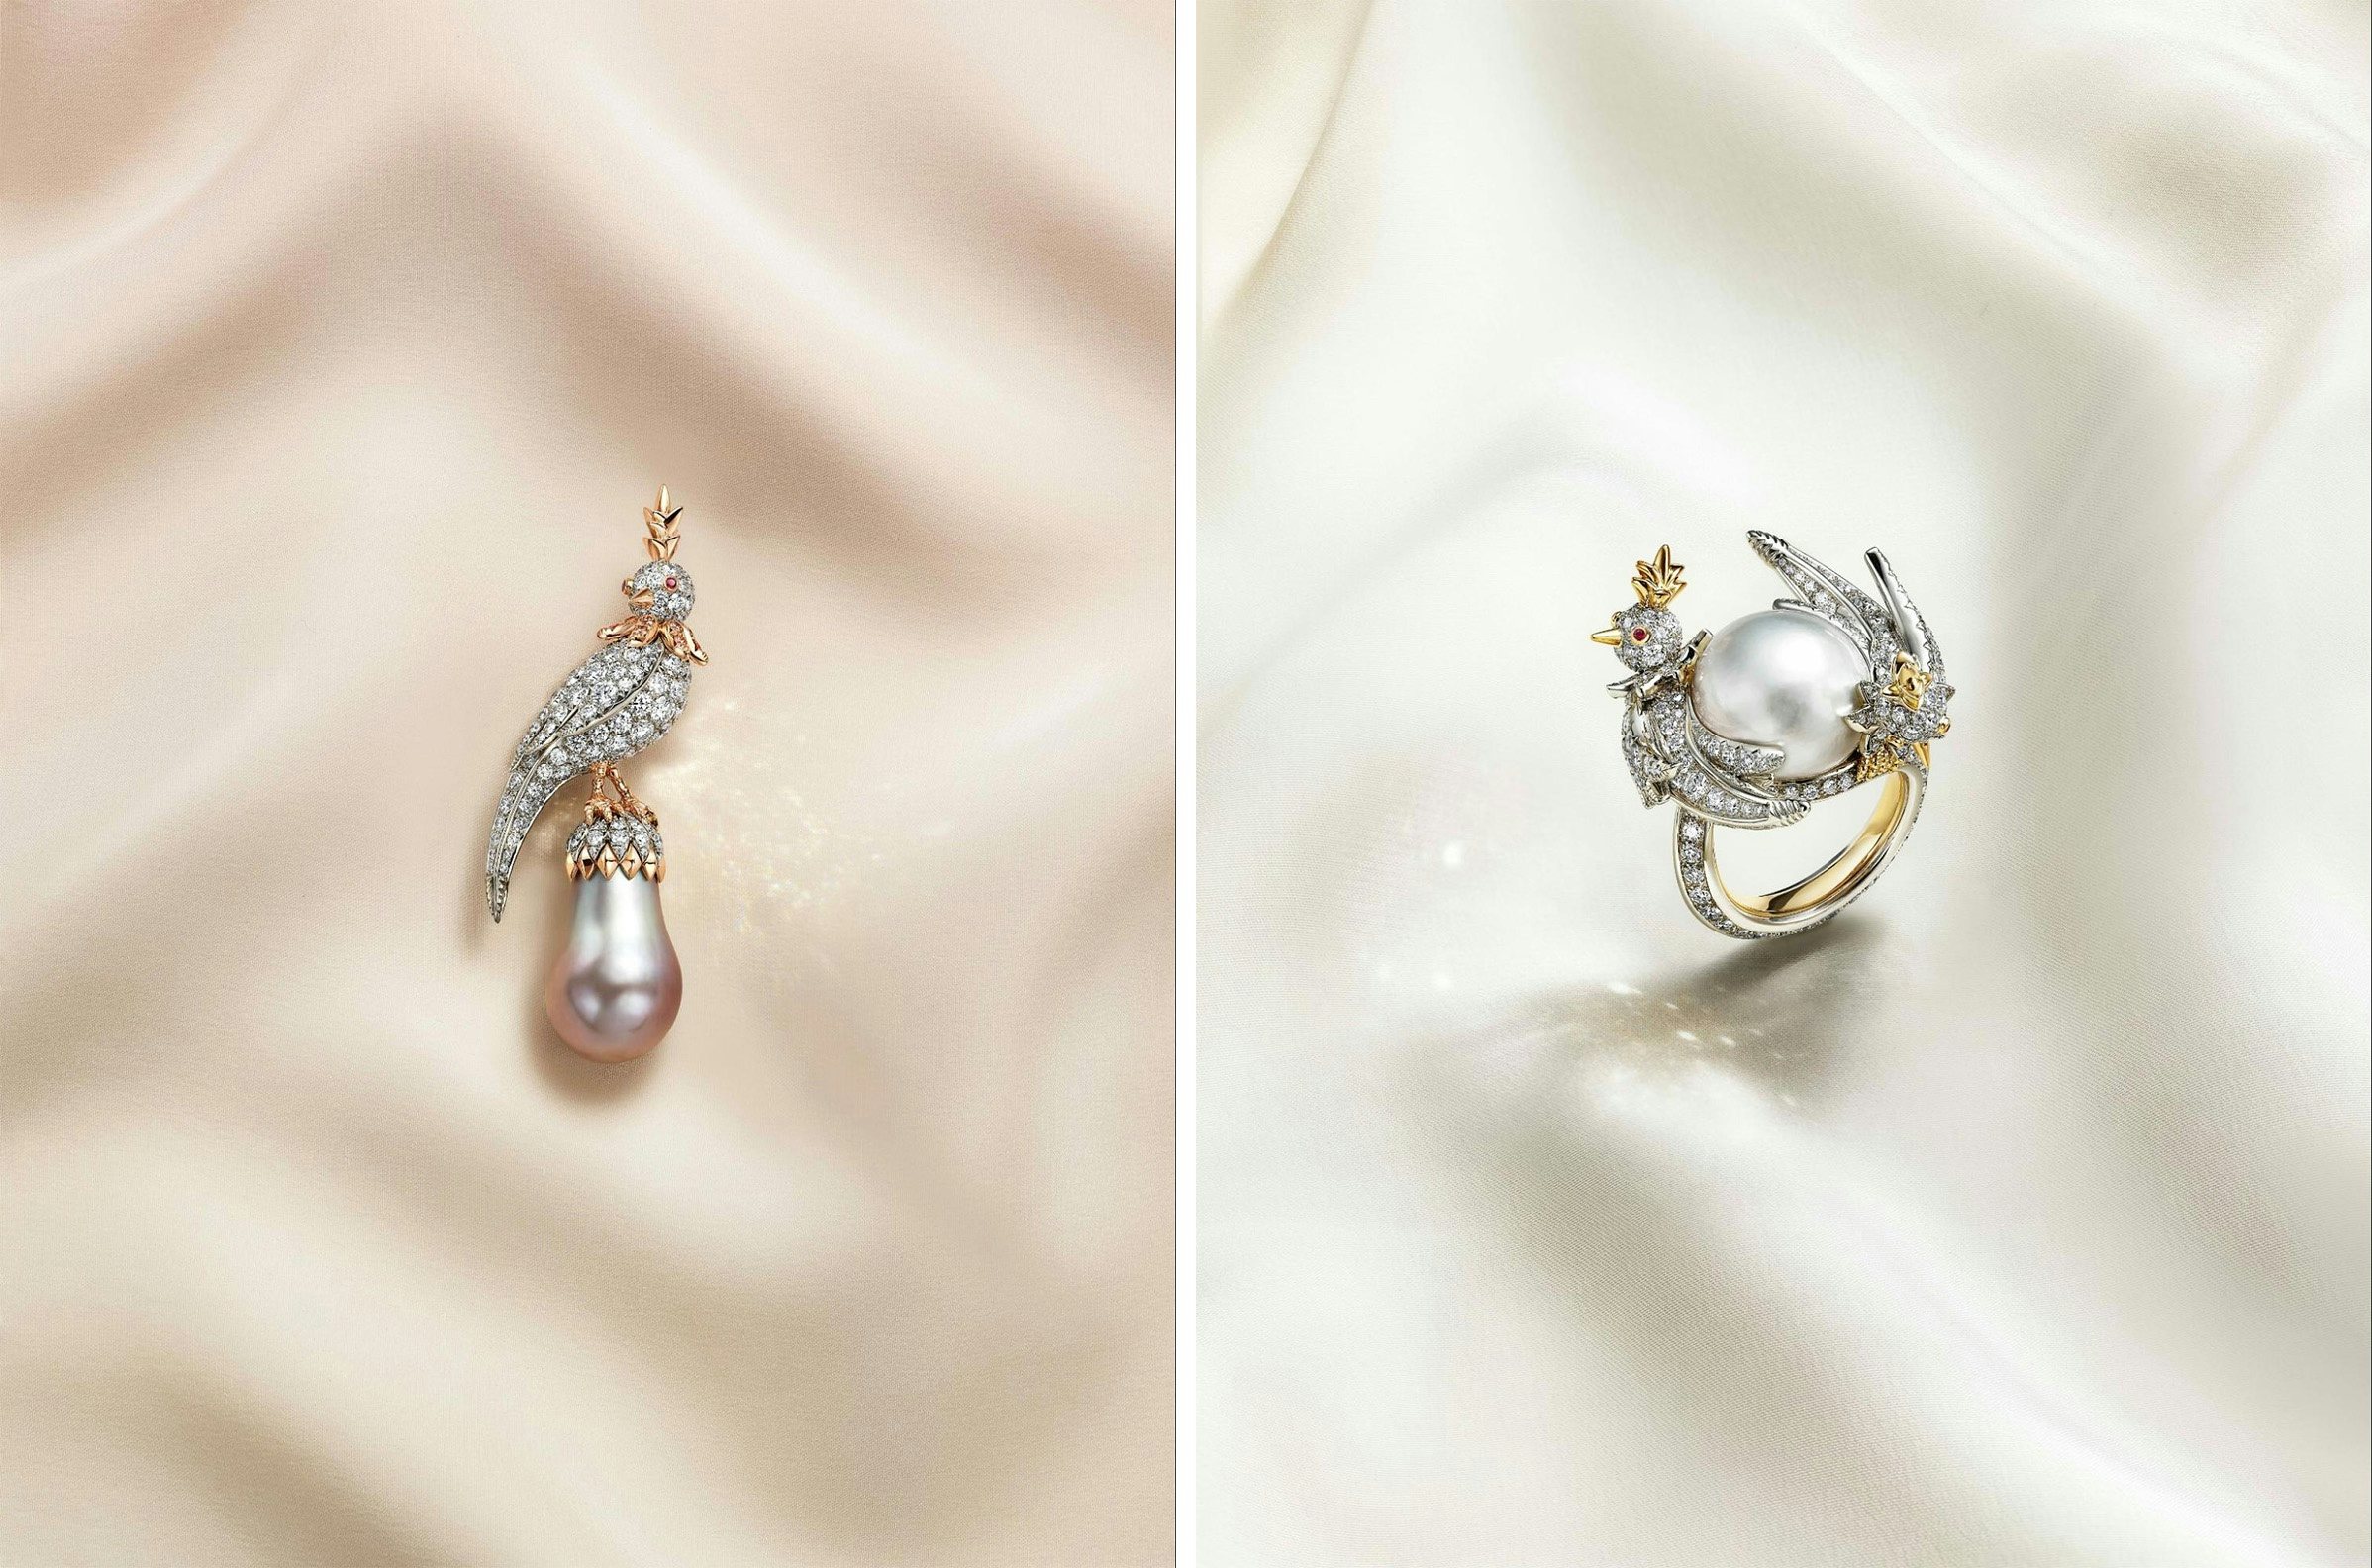 The rare natural saltwater pearls featured in the new collection are prized for their exceptional size, shape, and luster. Photo: Tiffany & Co. 